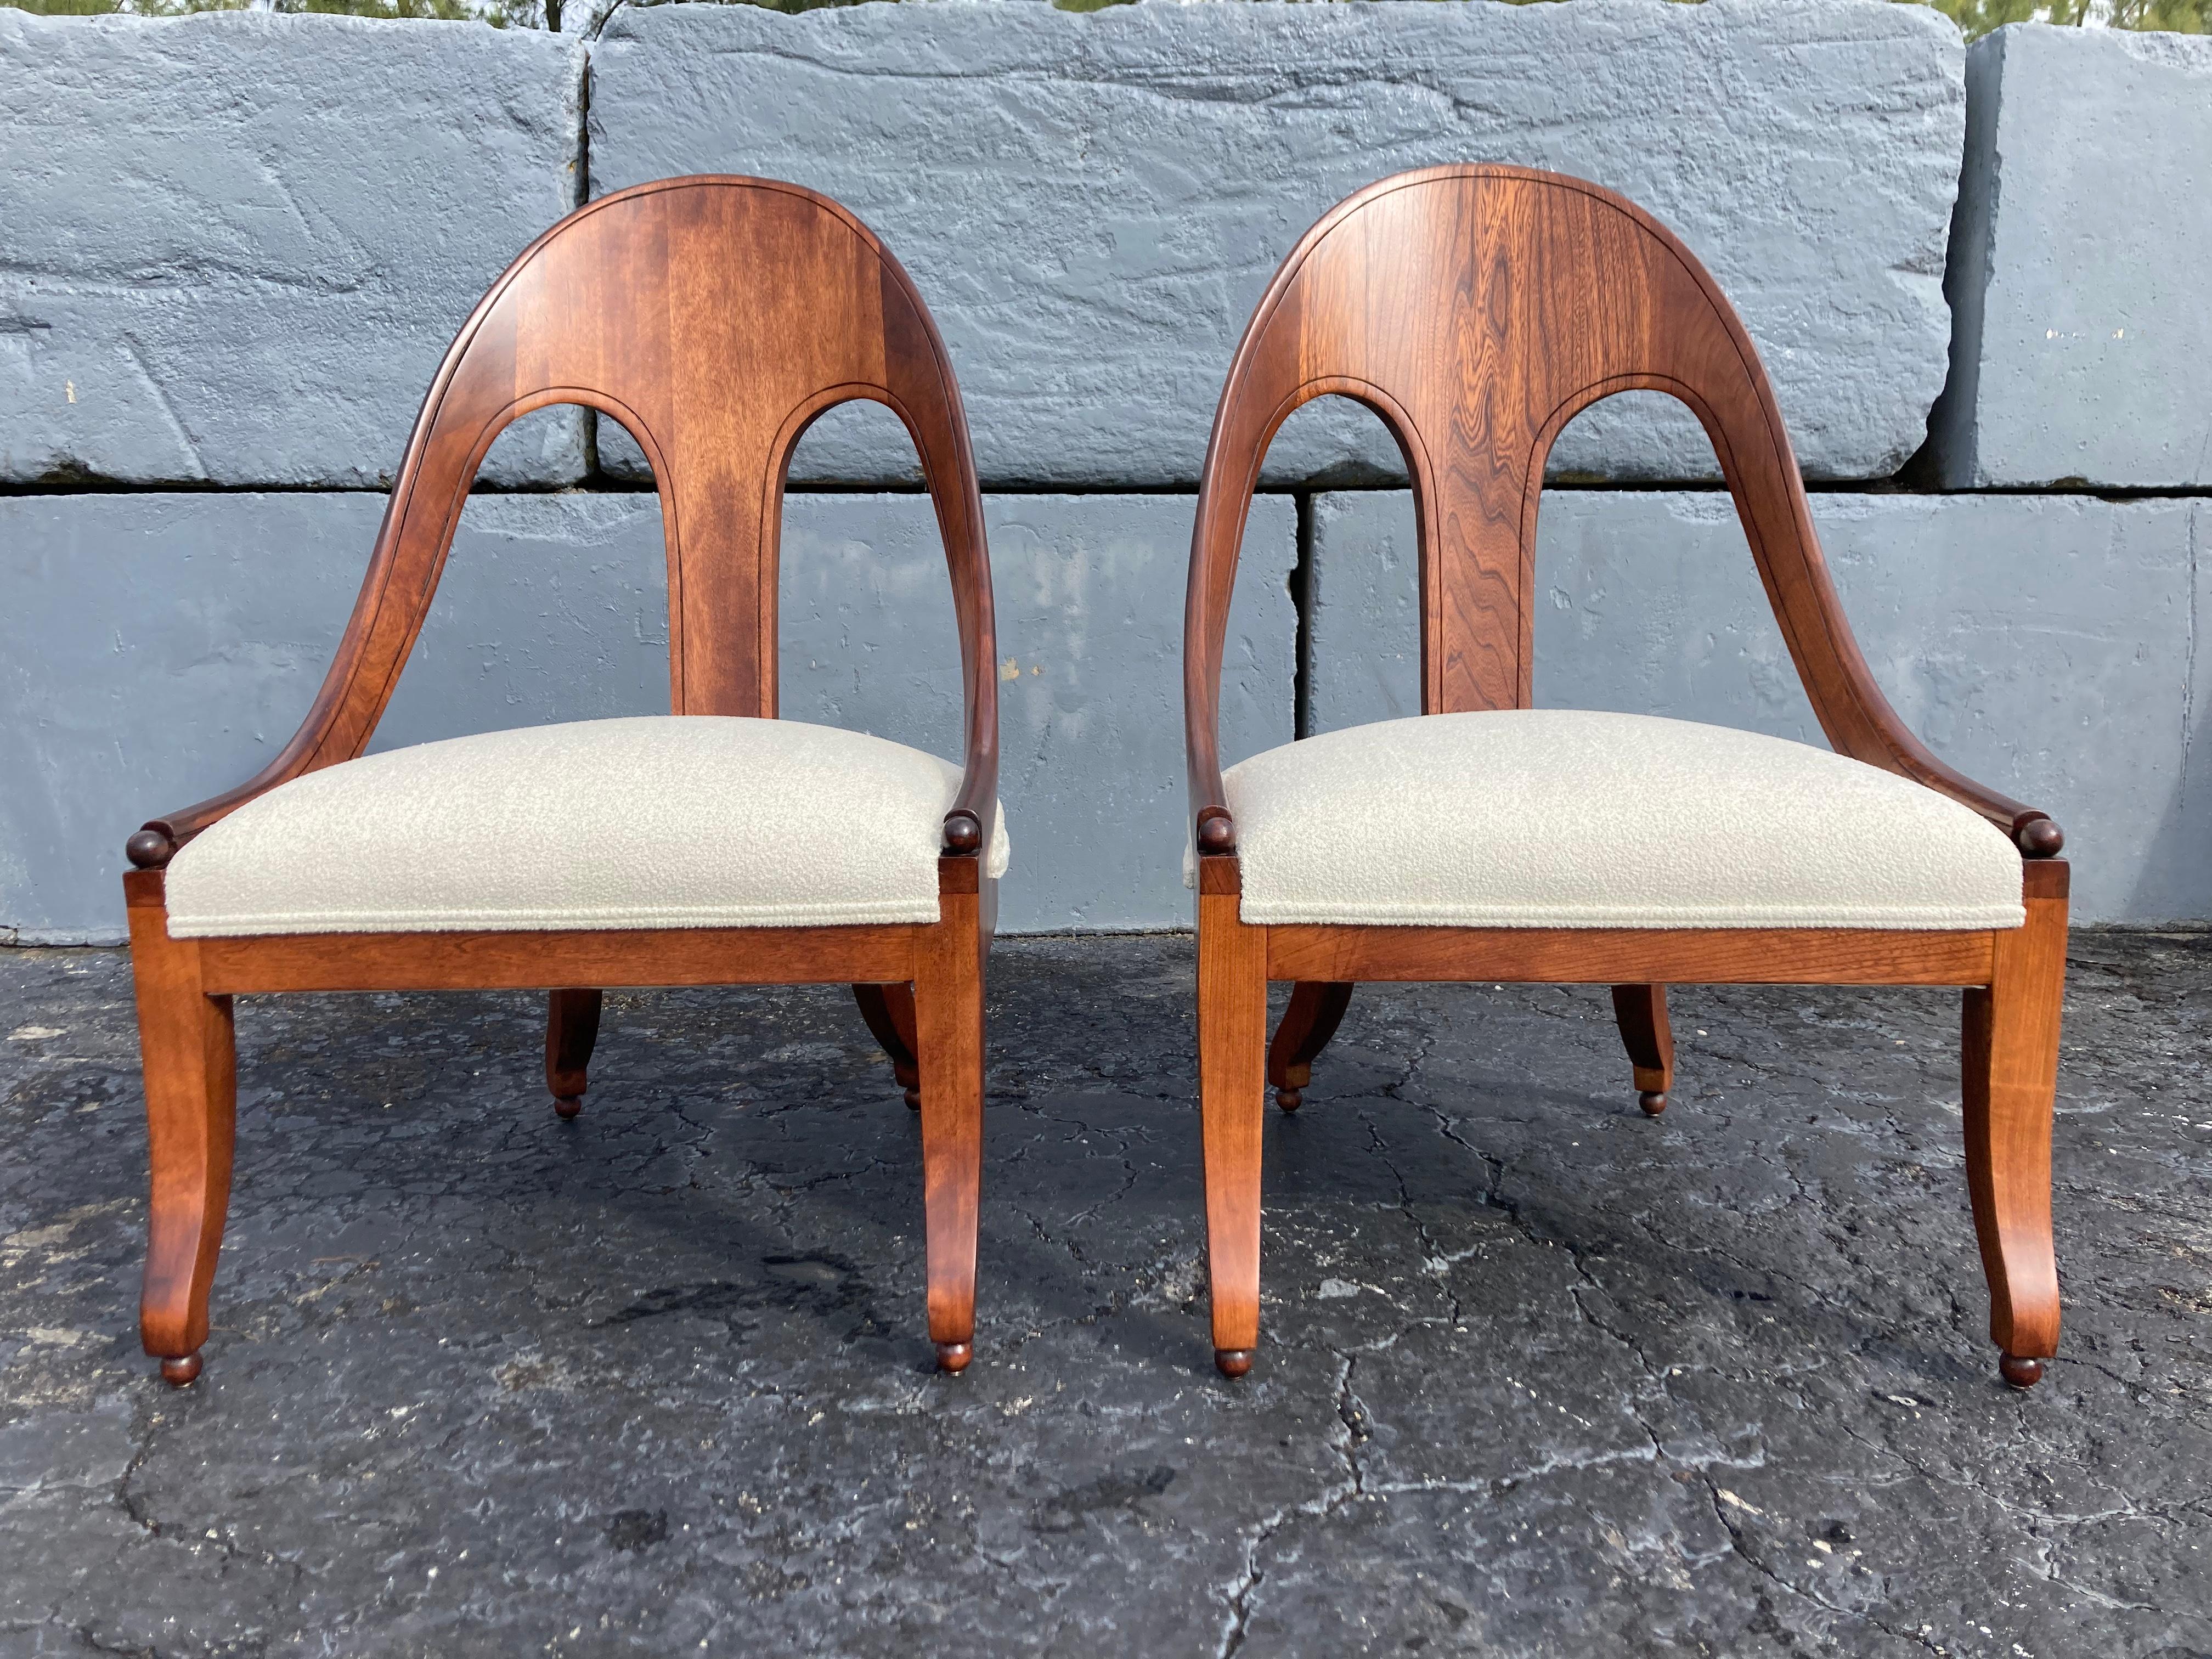 Beautiful lounge chairs in excellent condition. Quality craftsmanship with many great details. Original 1950s. Wood has been refinished and seats have been reupholstered. Ready for a new home.